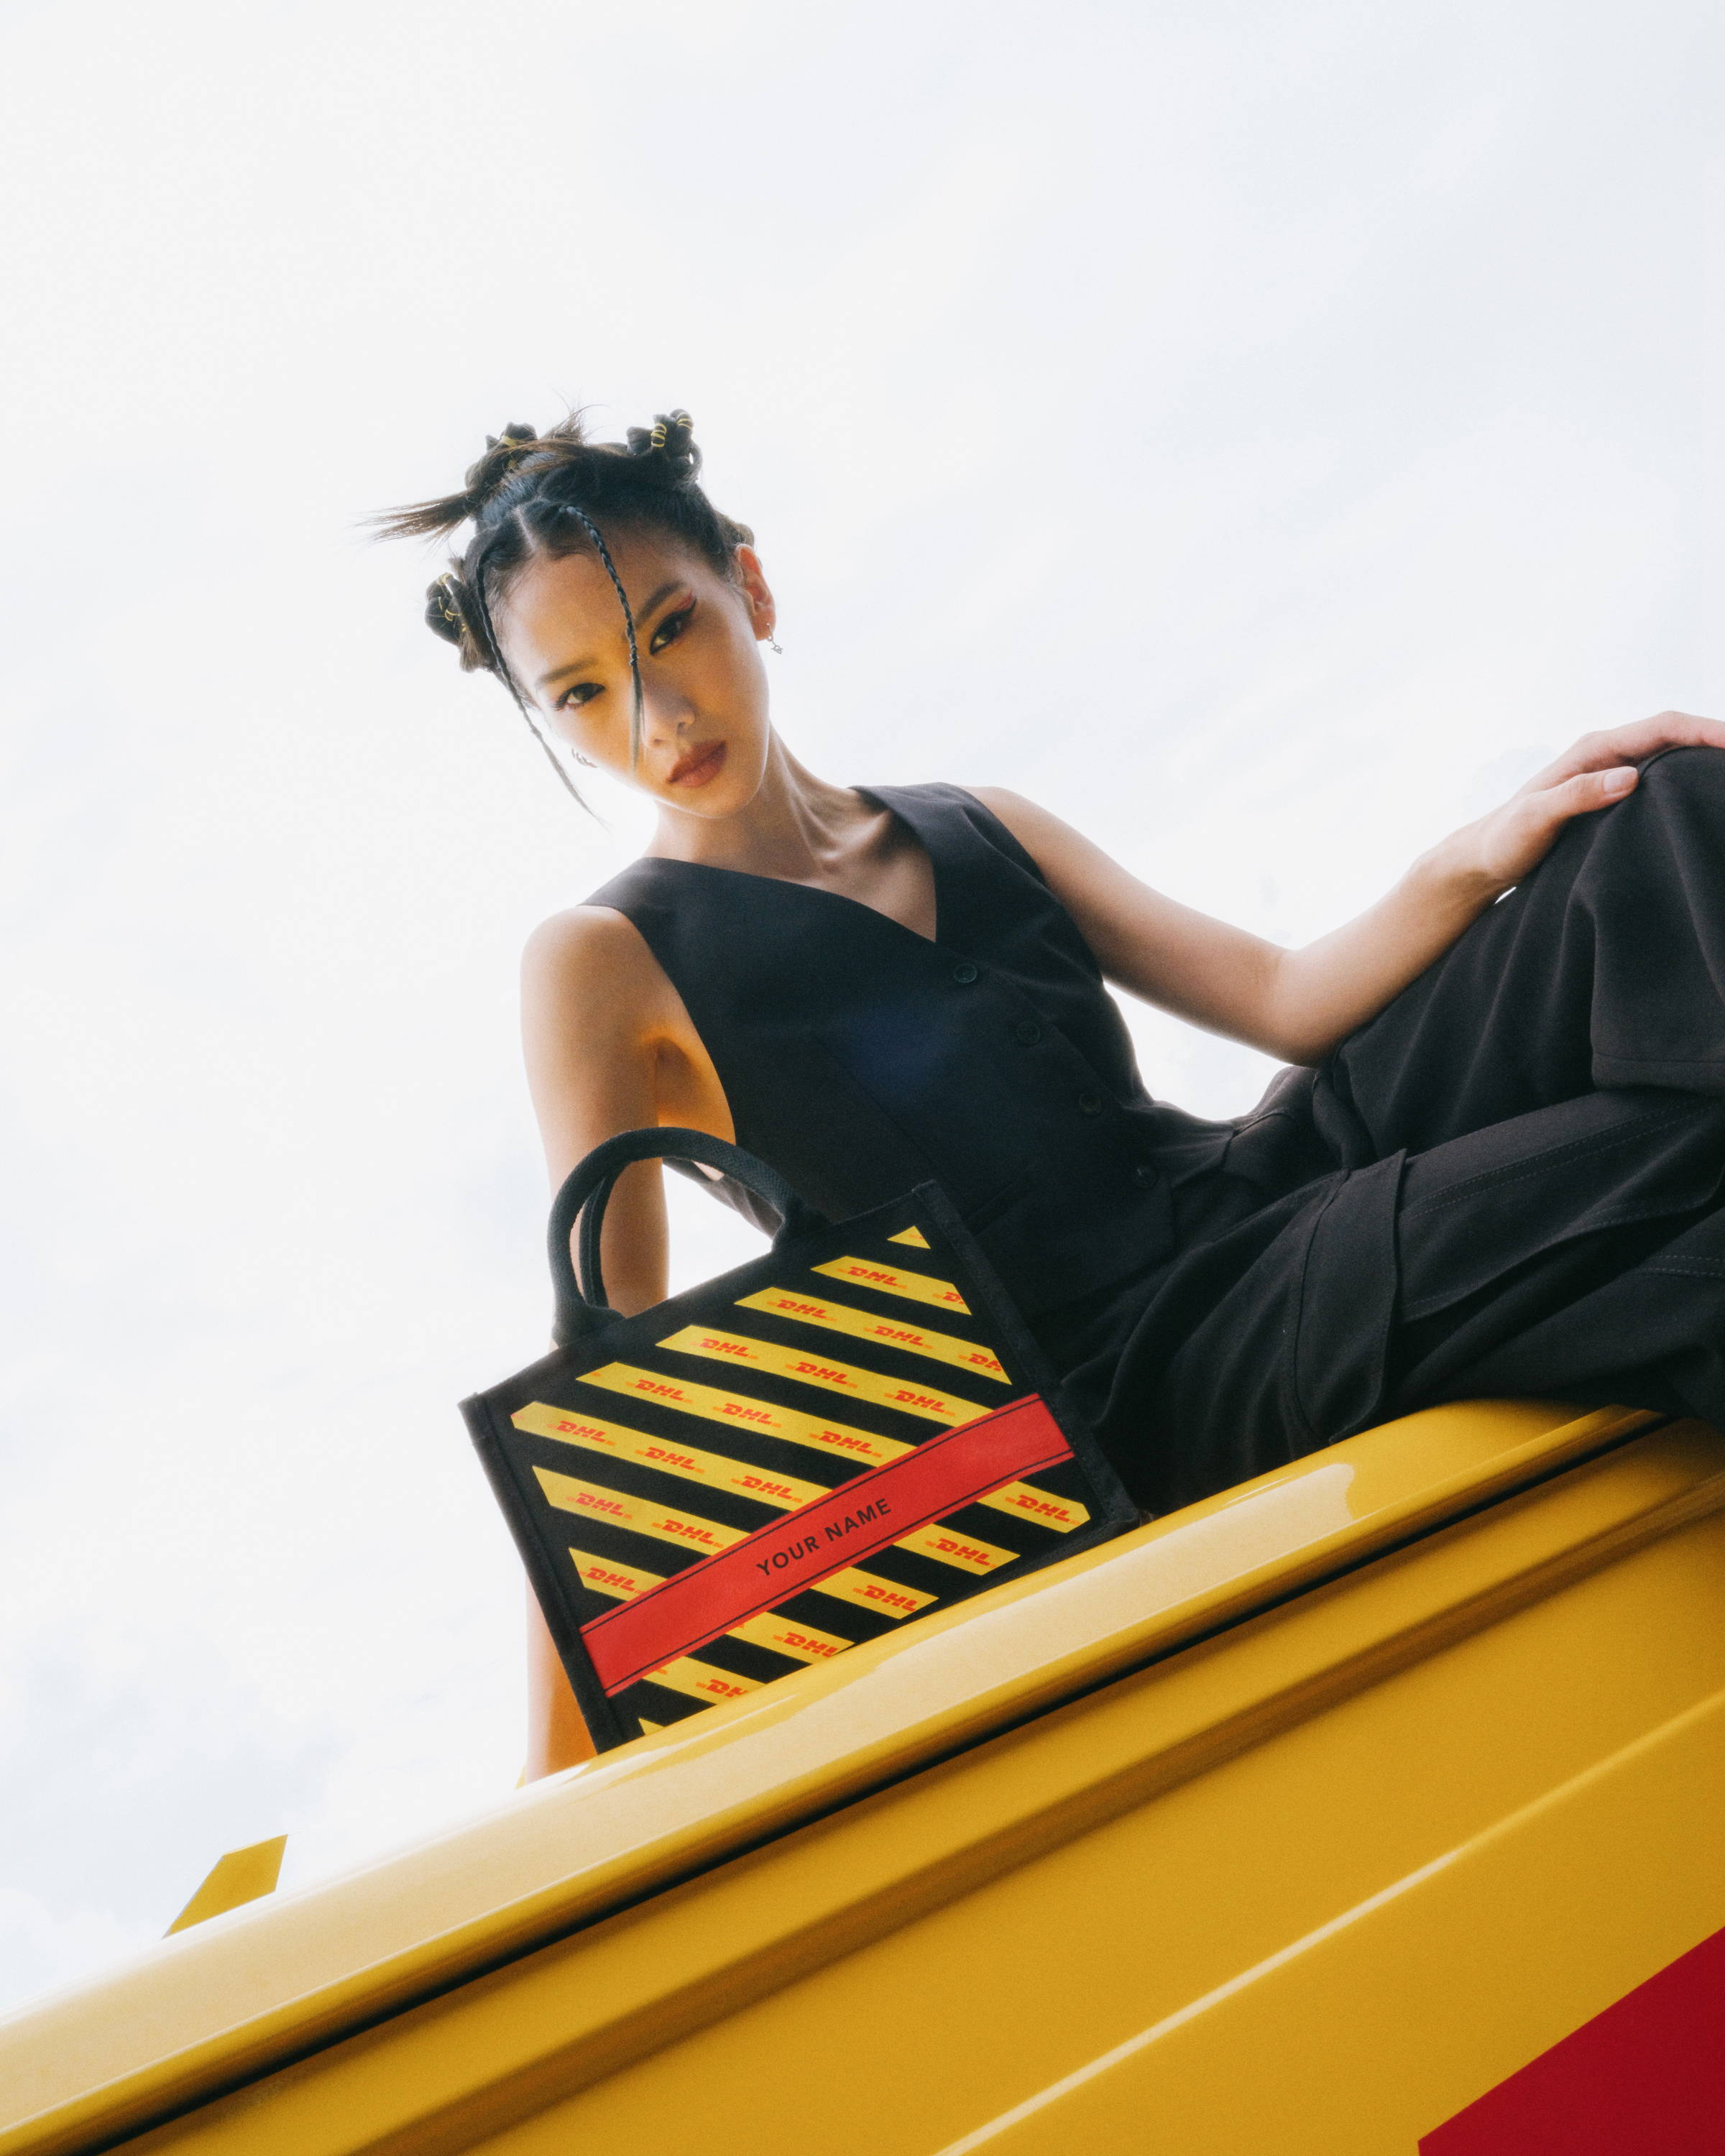 DHL & fashion designer Christy Ng collaborate on inspiring collection